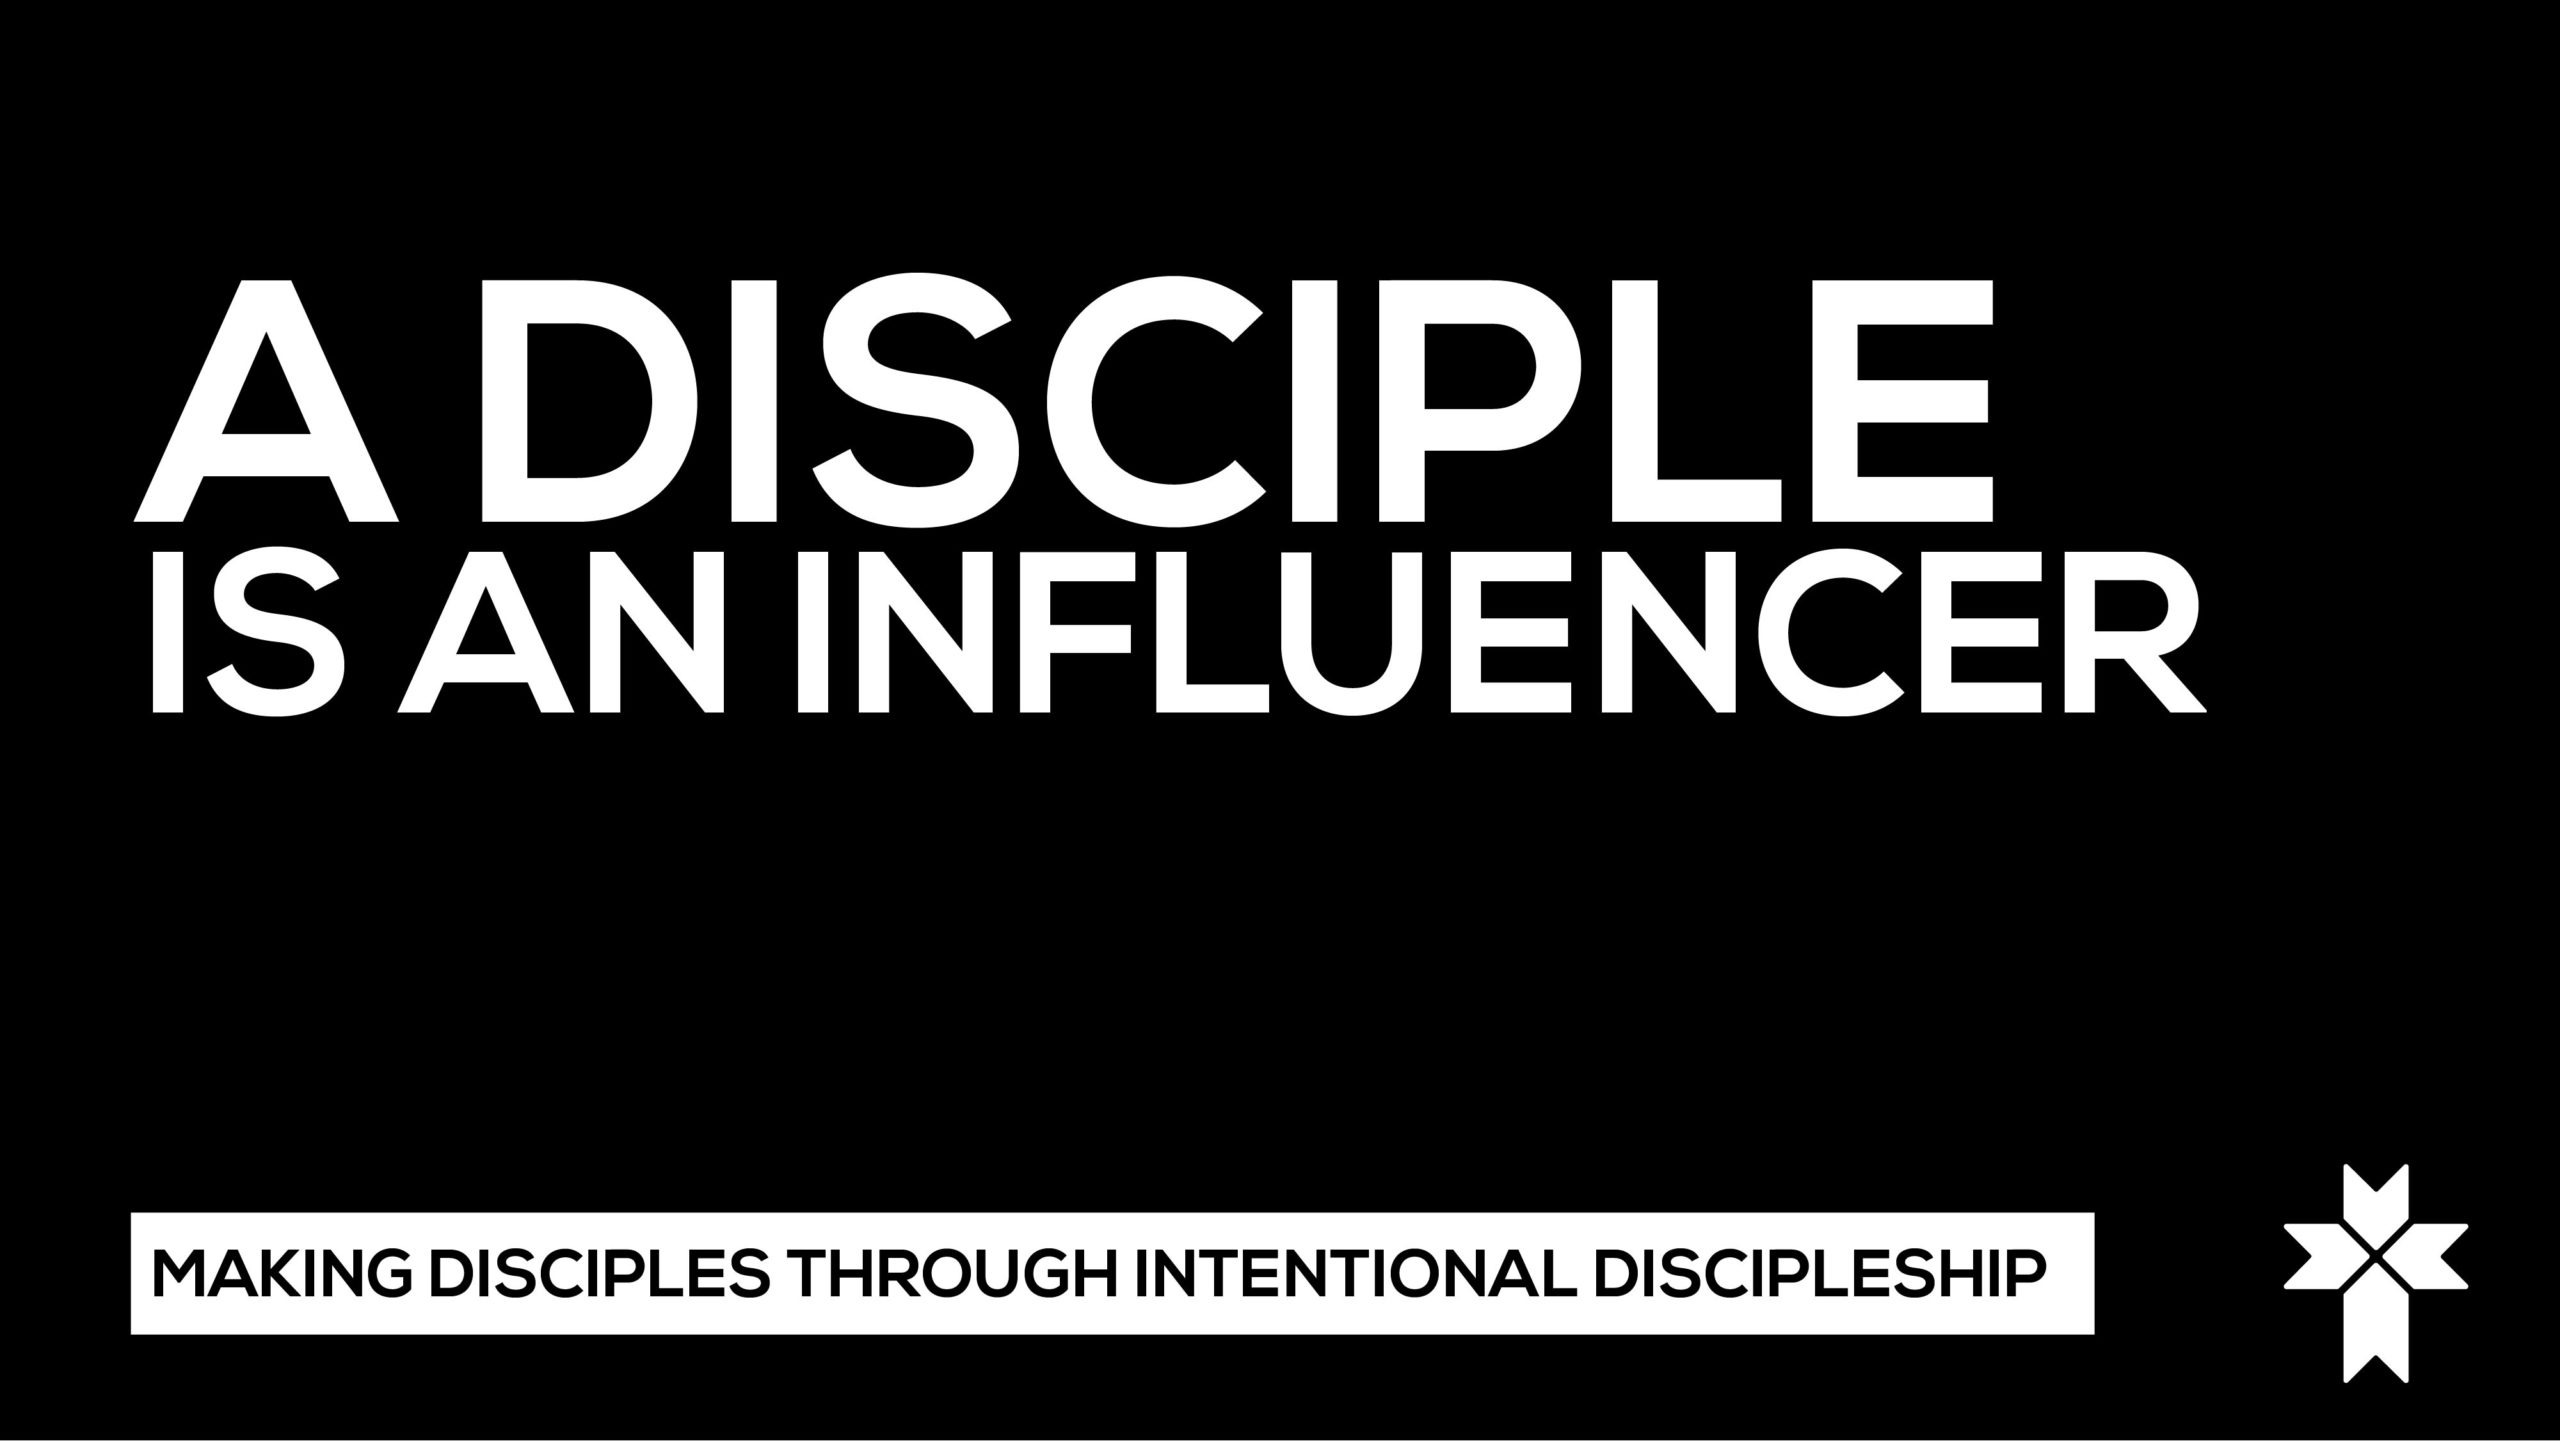 A Disciple is an Influence with the Gospel